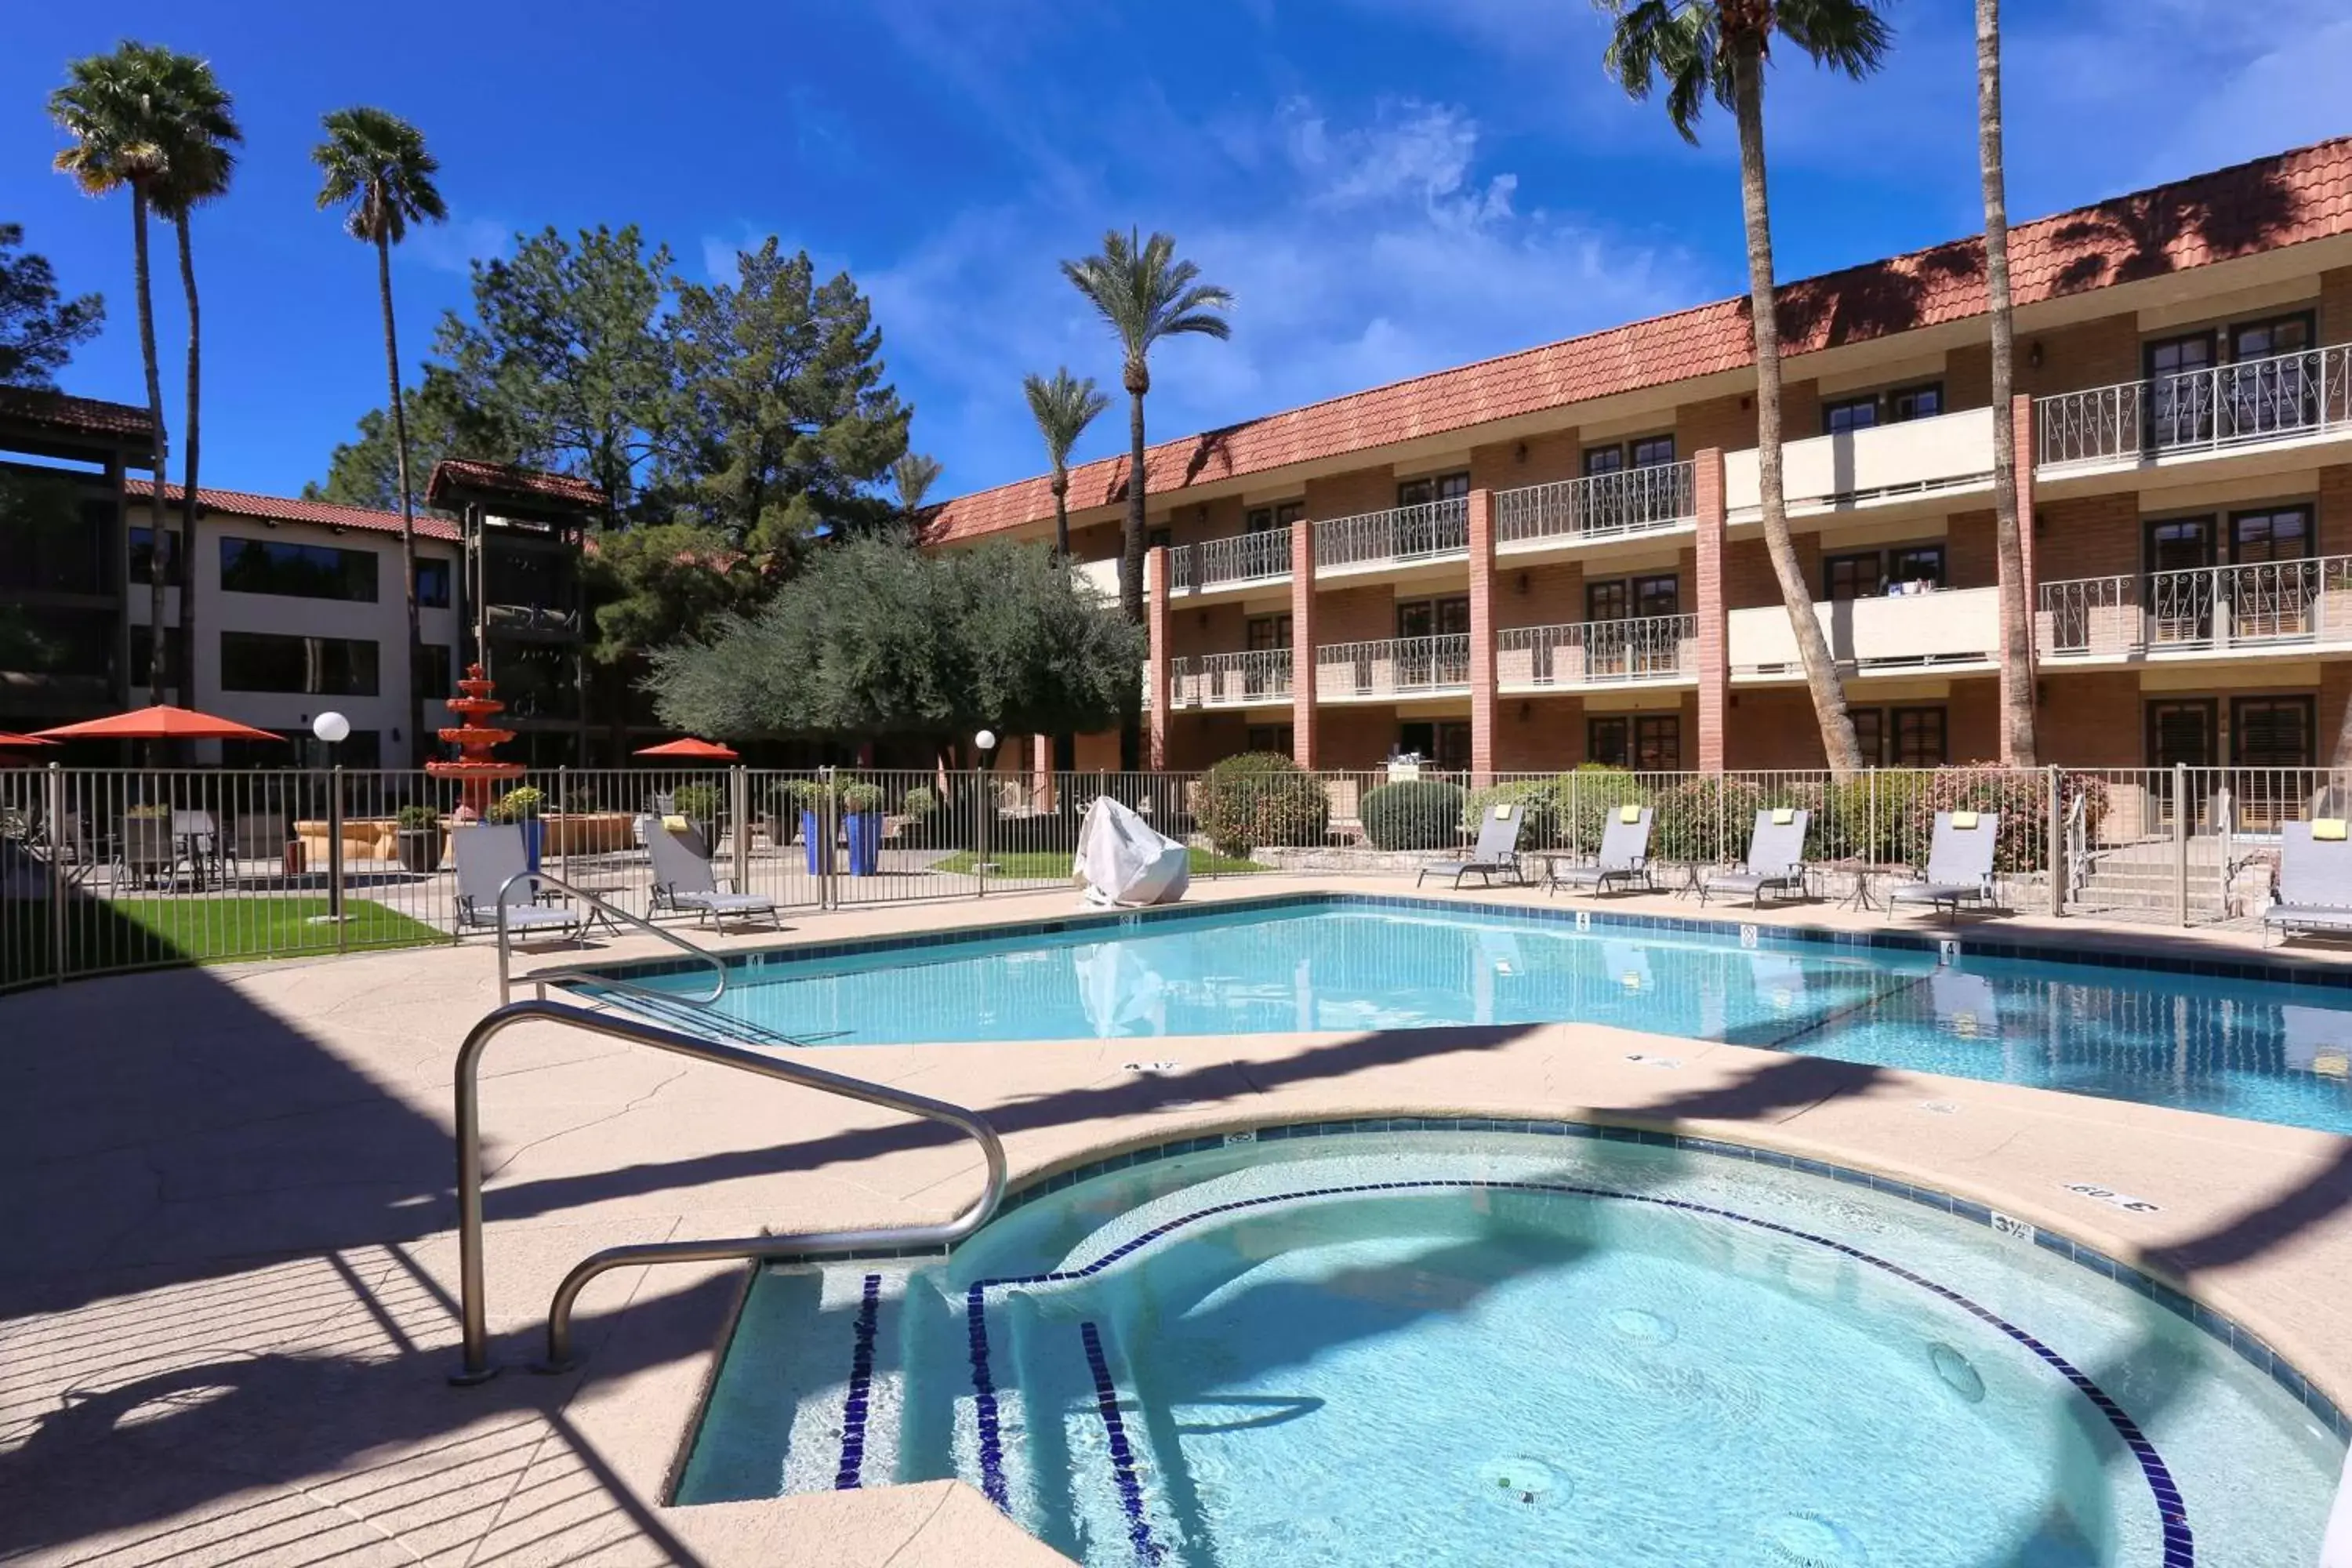 Pool view, Property Building in DoubleTree Suites by Hilton Tucson Airport